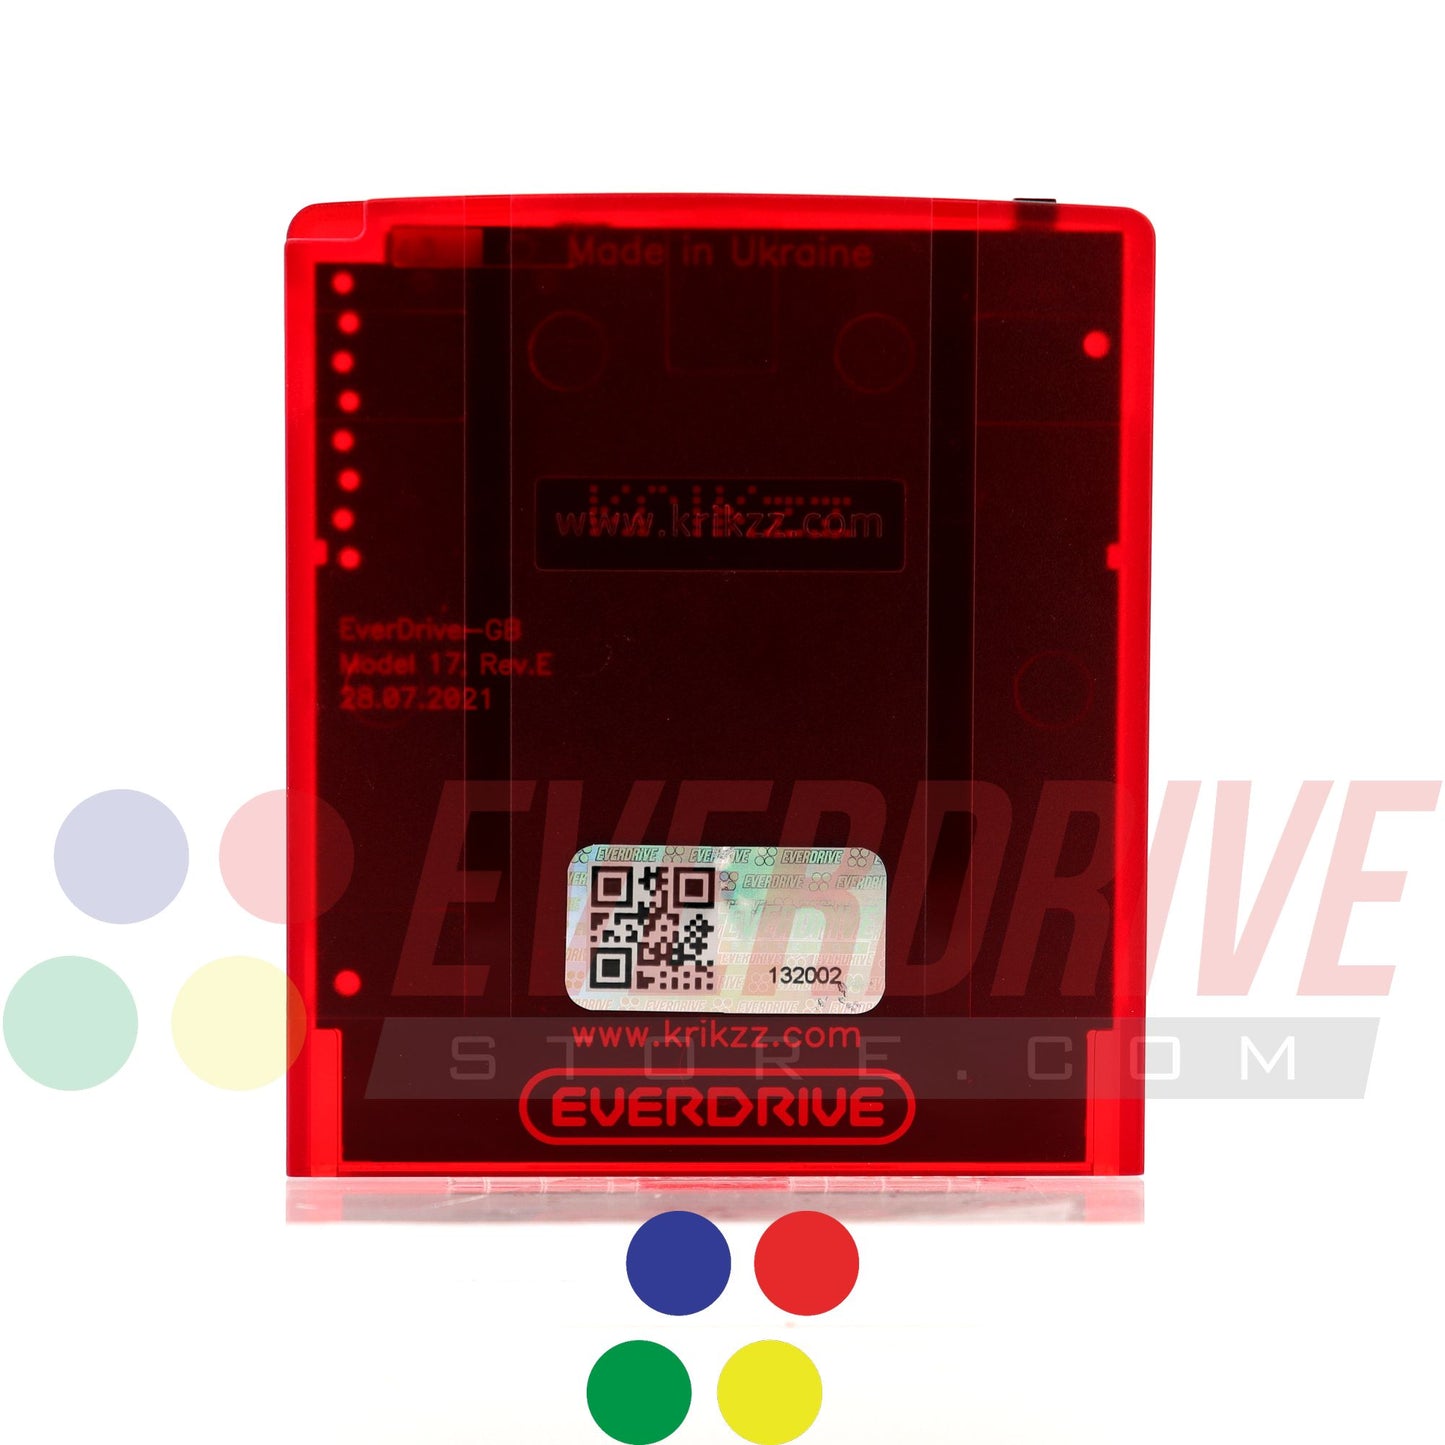 Everdrive GB X7 - Frosted Red